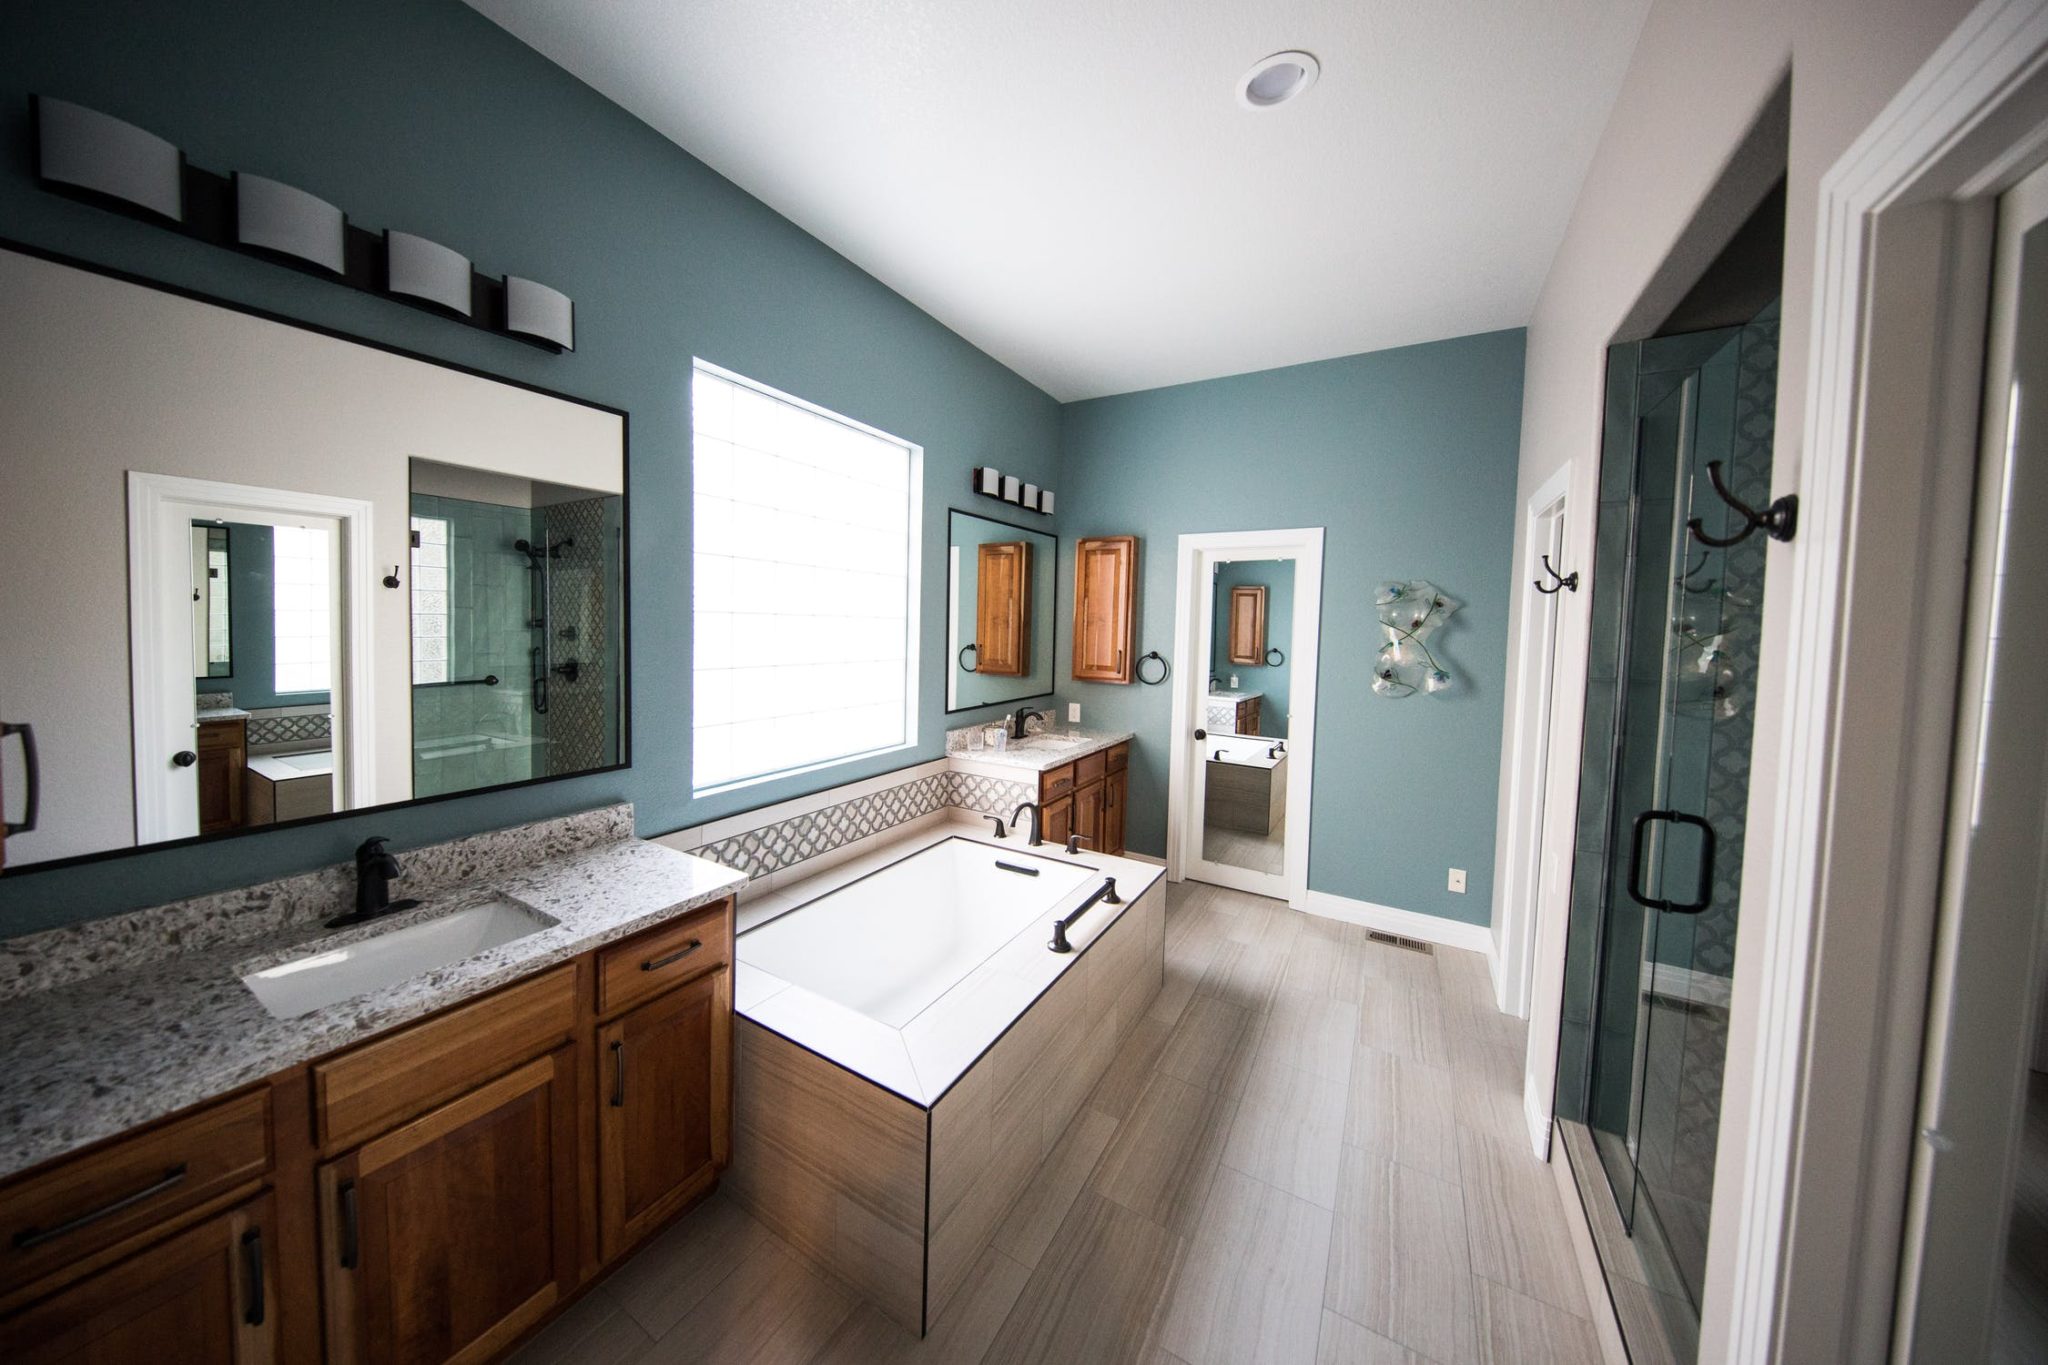 HighEnd Bathroom Finishes To Consider For Your Next Renovation